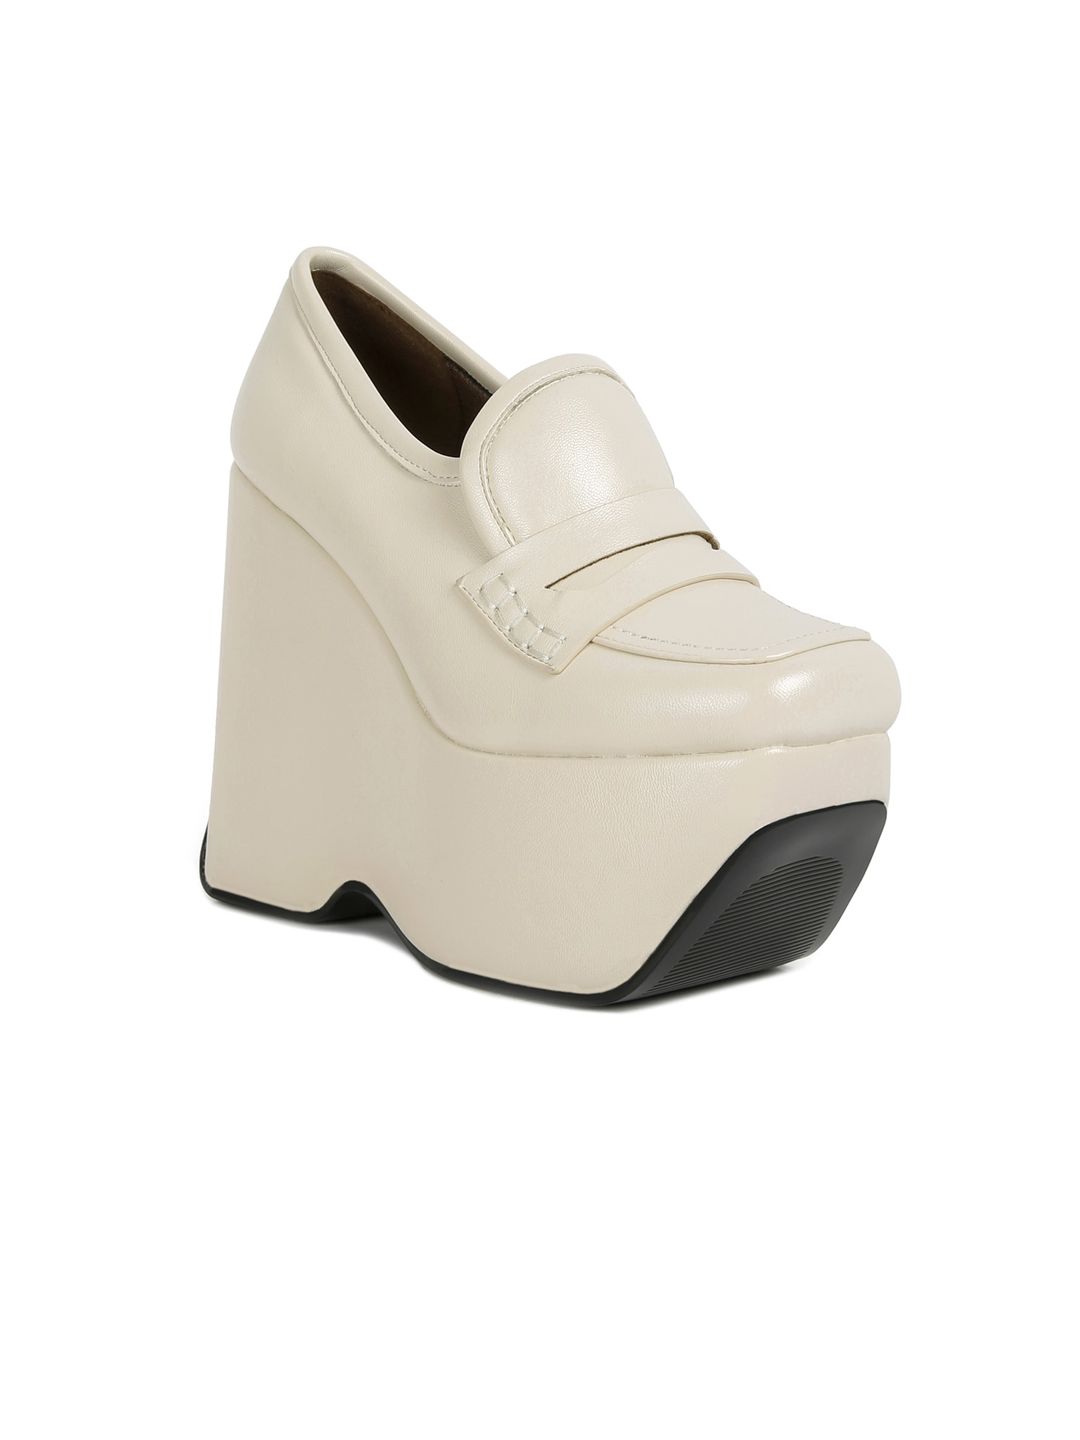 RAG & CO Women High Platform Wedge Loafers Price in India